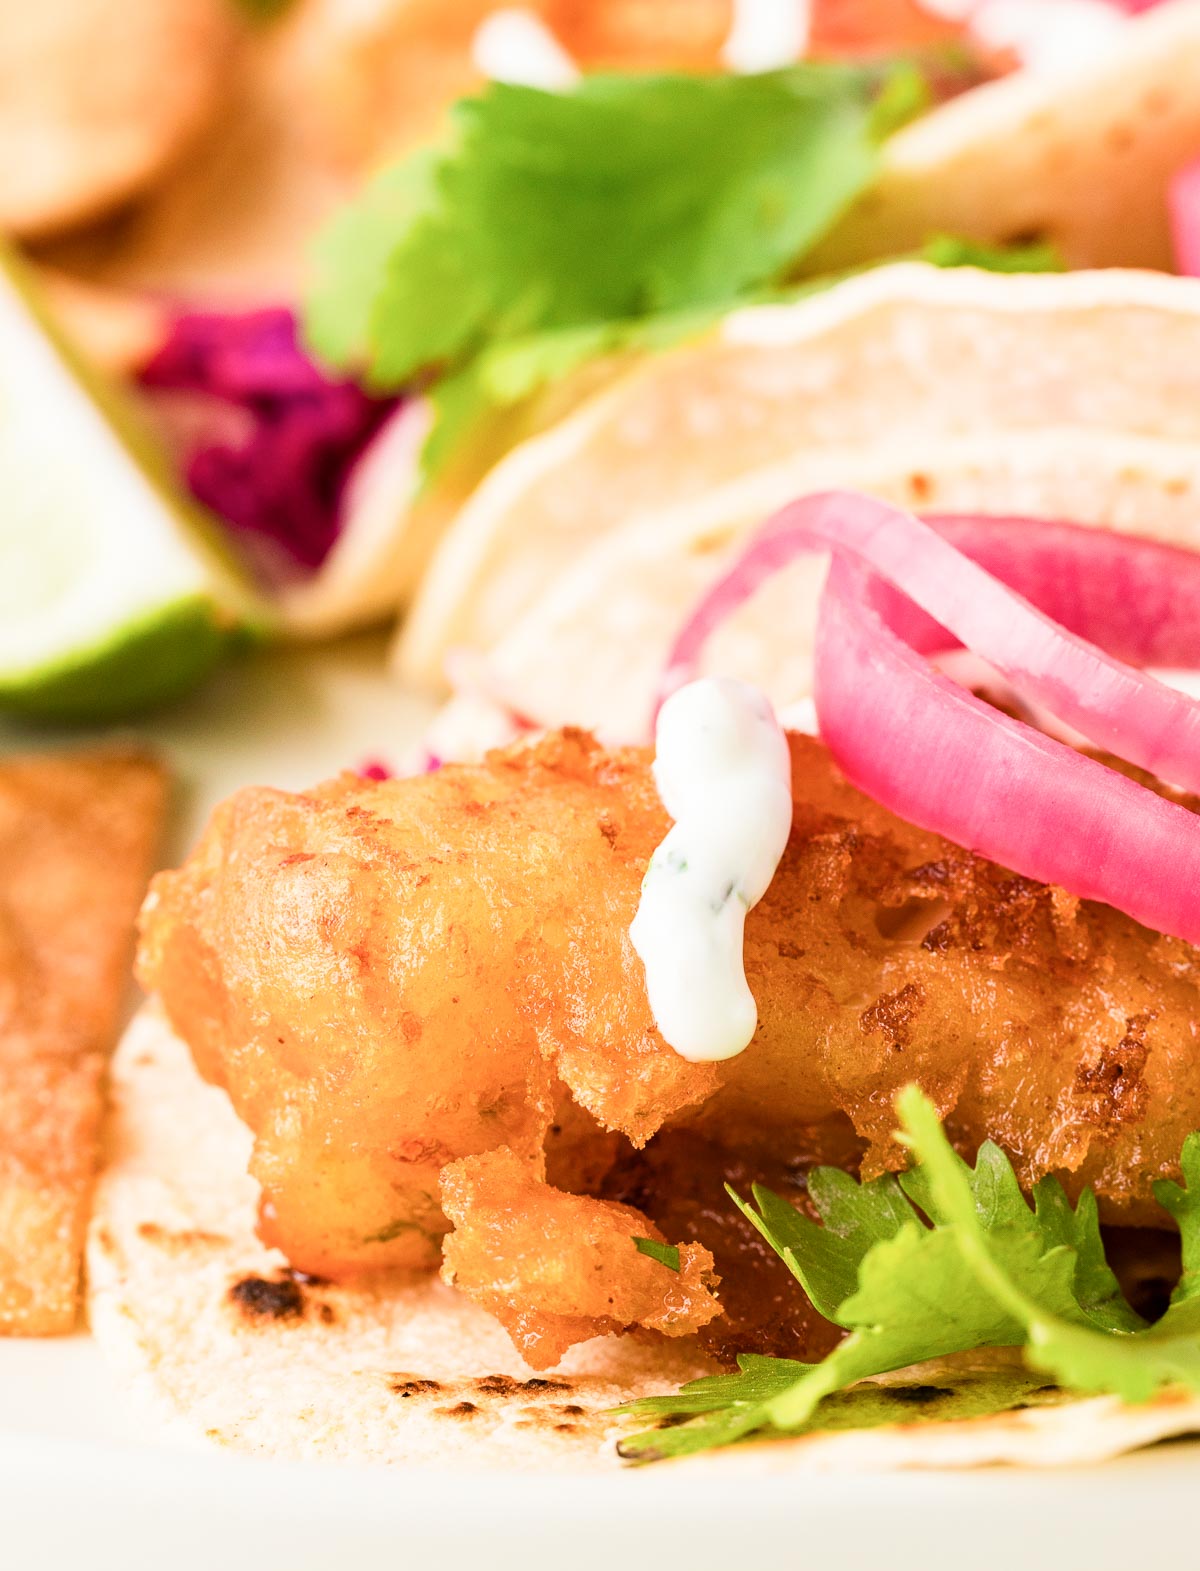 Close-up of a fish taco garnished with cilantro and pickled red onions, with a drizzle of creamy sauce.